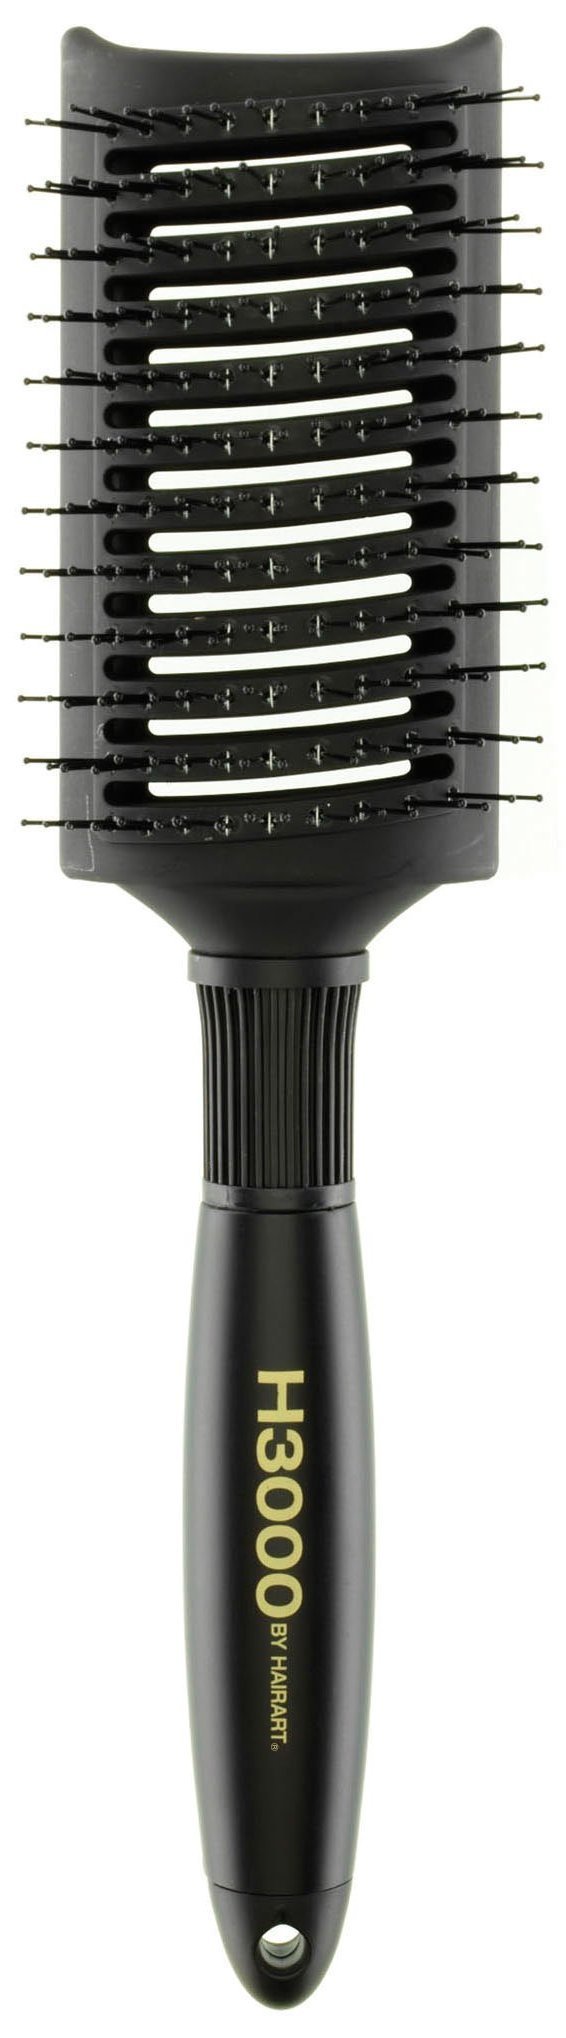 Vent Brush - H3000 Collection HairArt Int'l Inc.